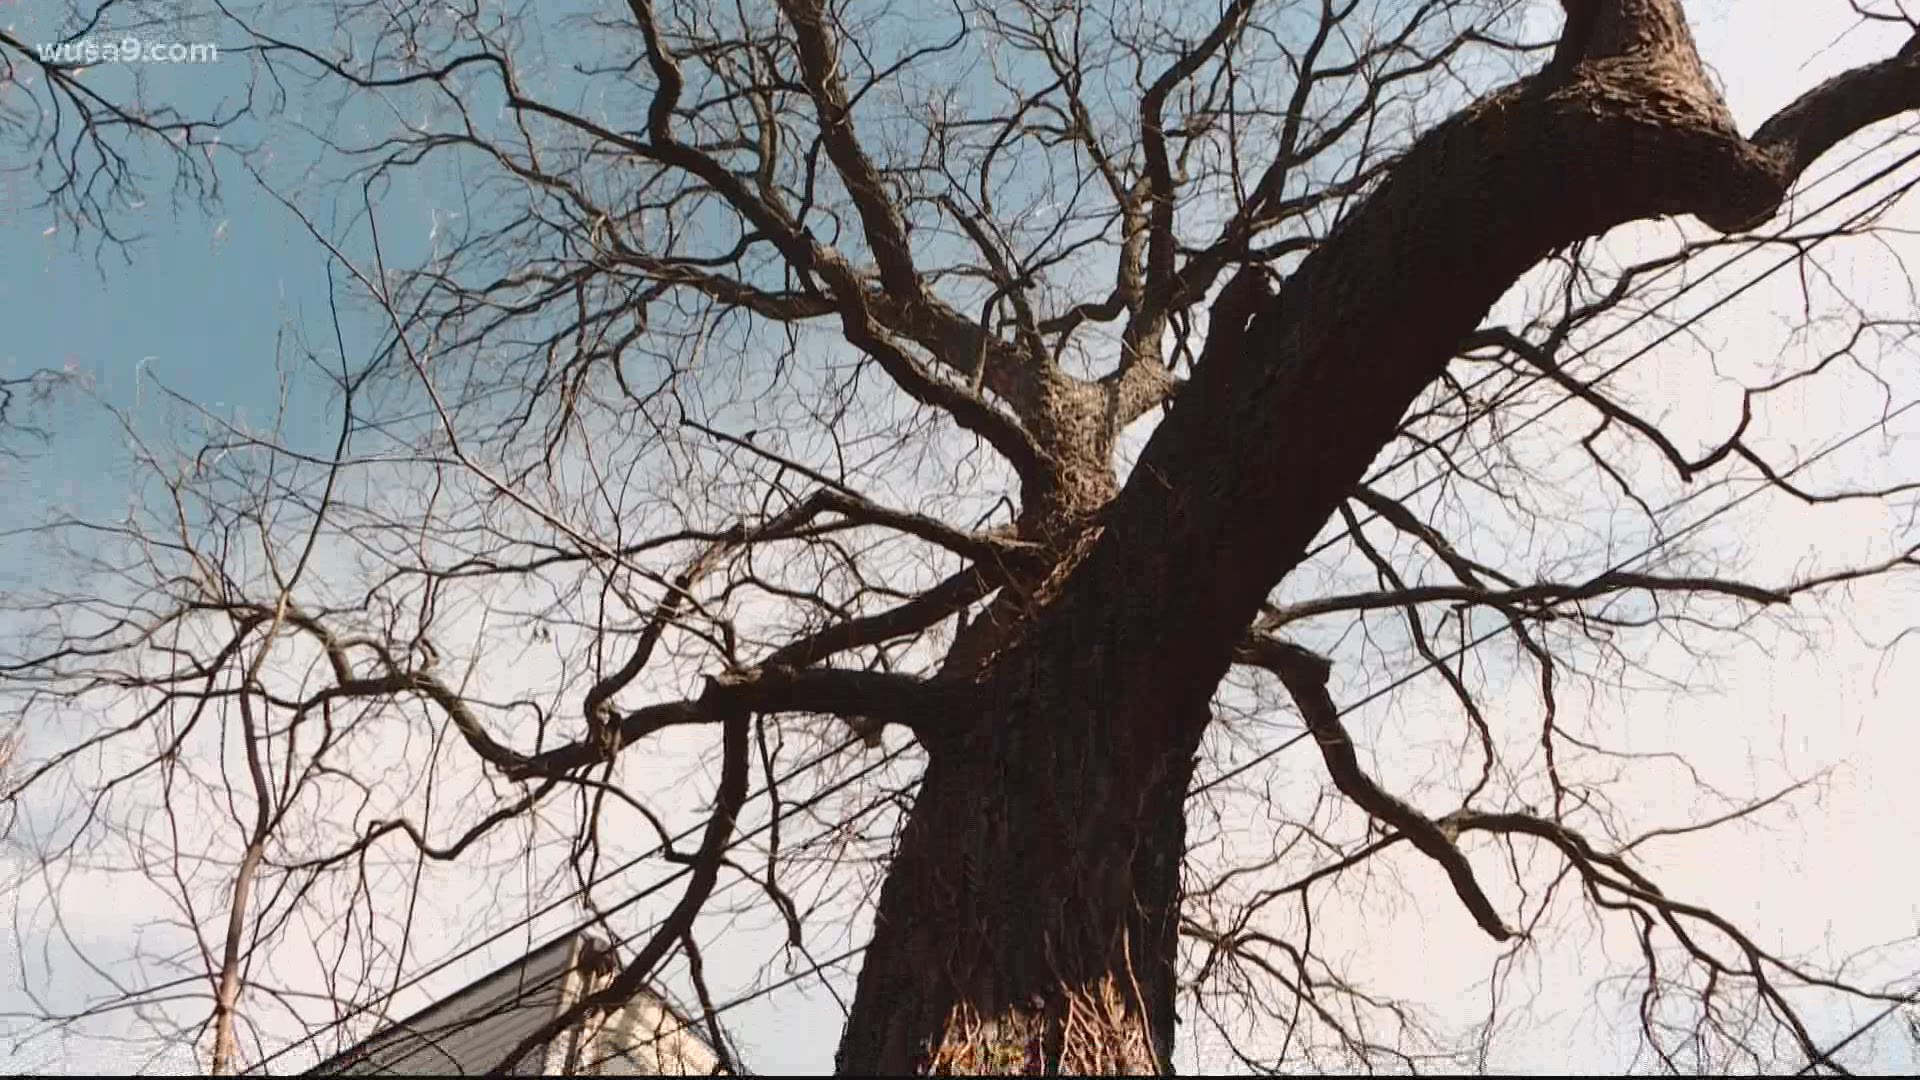 A tree crew told neighbors the more than century-old giant had to go to make way for condos. Neighbors were desperate to save it.